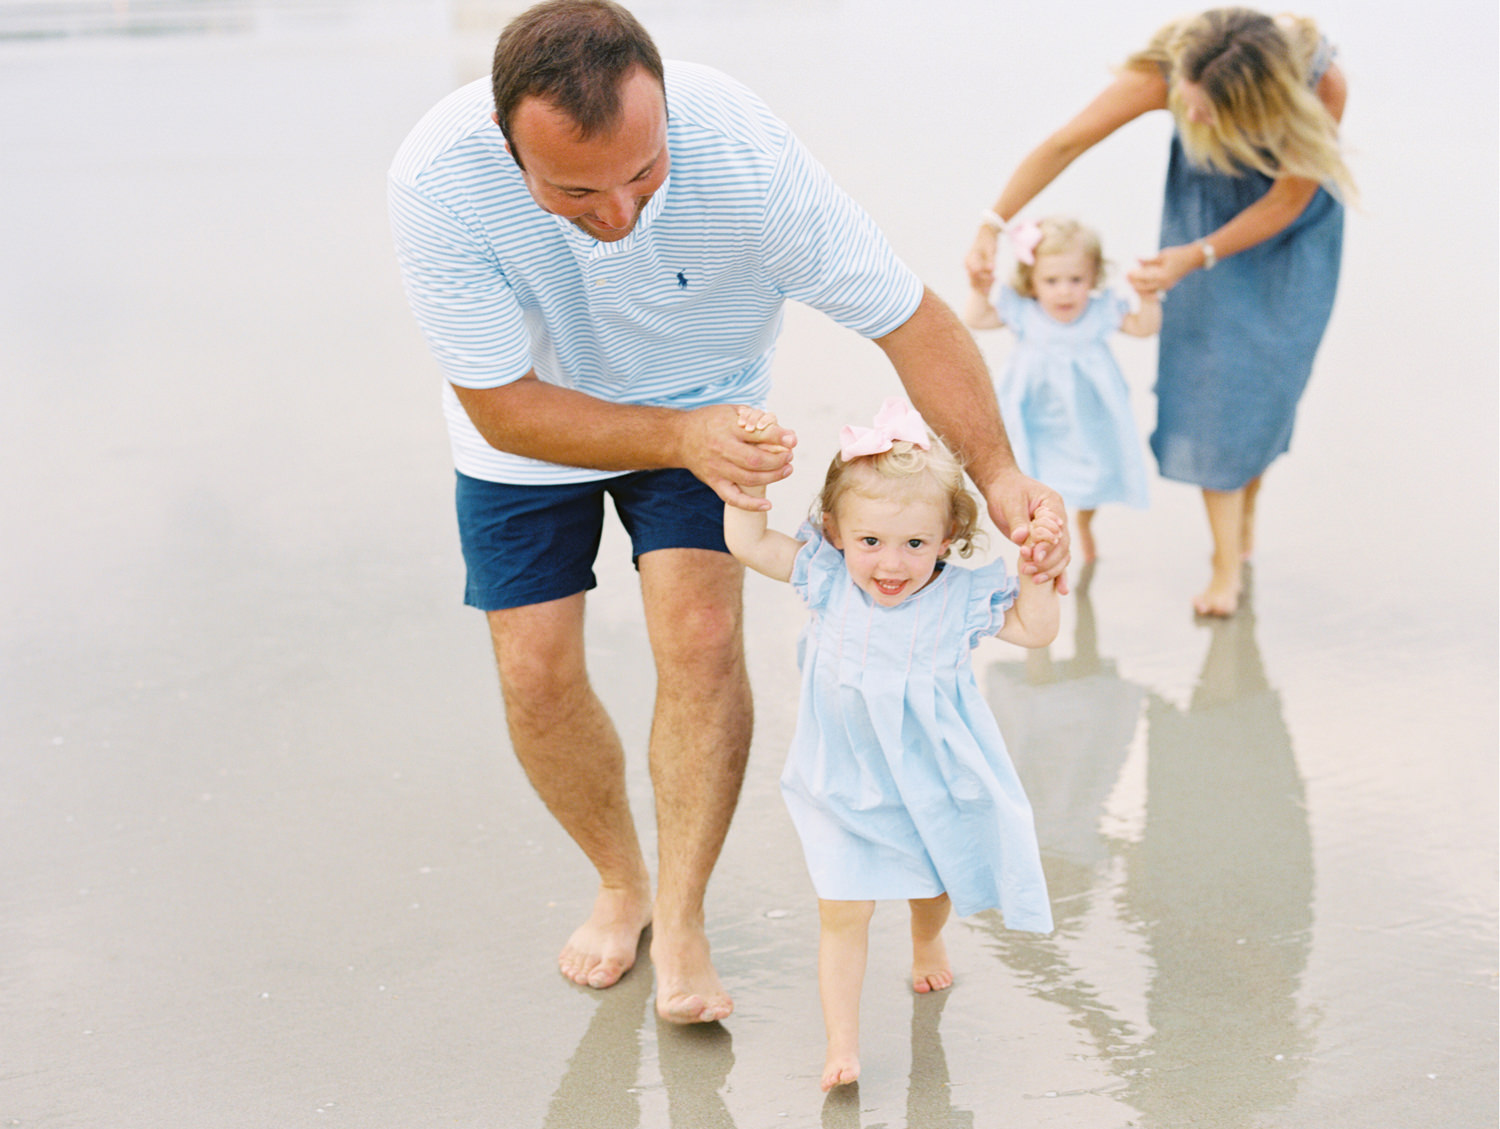 dad in blue shirt and shorts holding his toddler daughters hands and helping her walk on the sandy beach